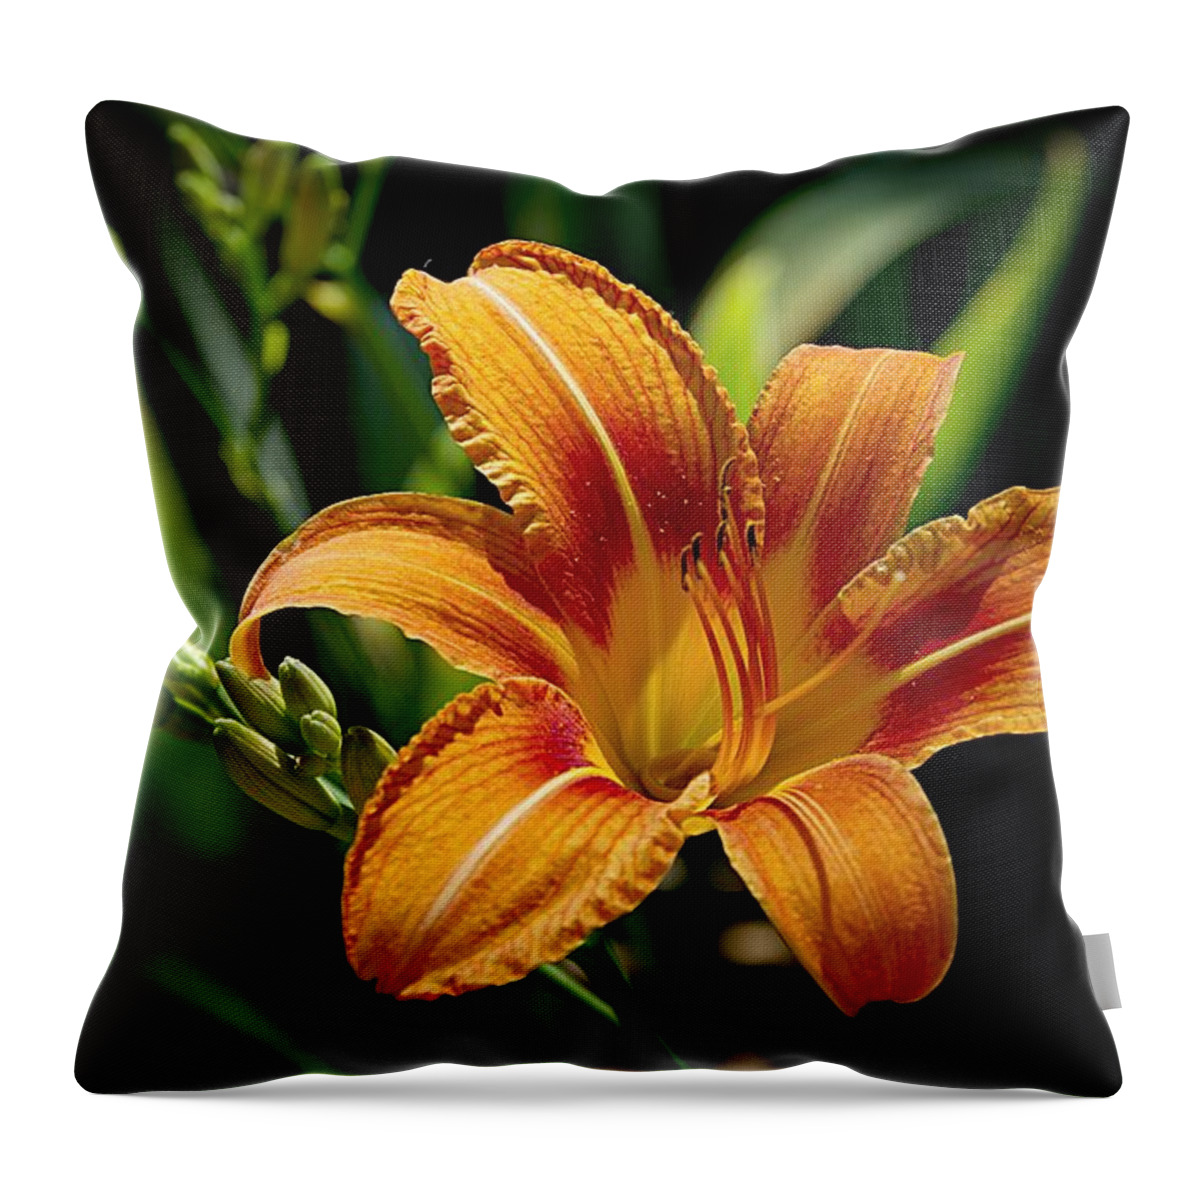 Native Day Lily Throw Pillow featuring the photograph Bright Daylily by Karen McKenzie McAdoo